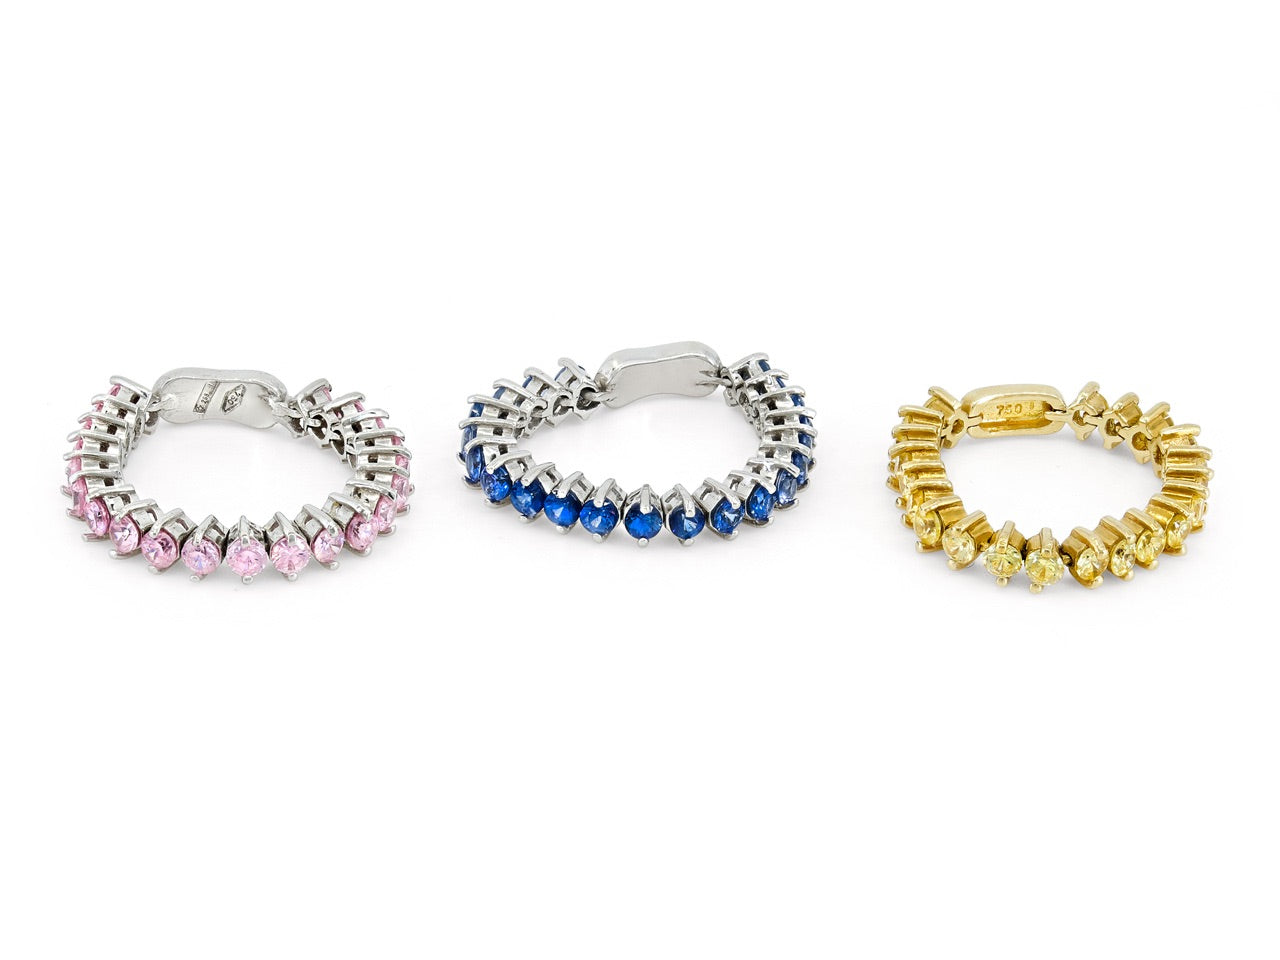 Trio of Flexible Yellow, Pink and Blue Sapphire Bands in 18K Gold